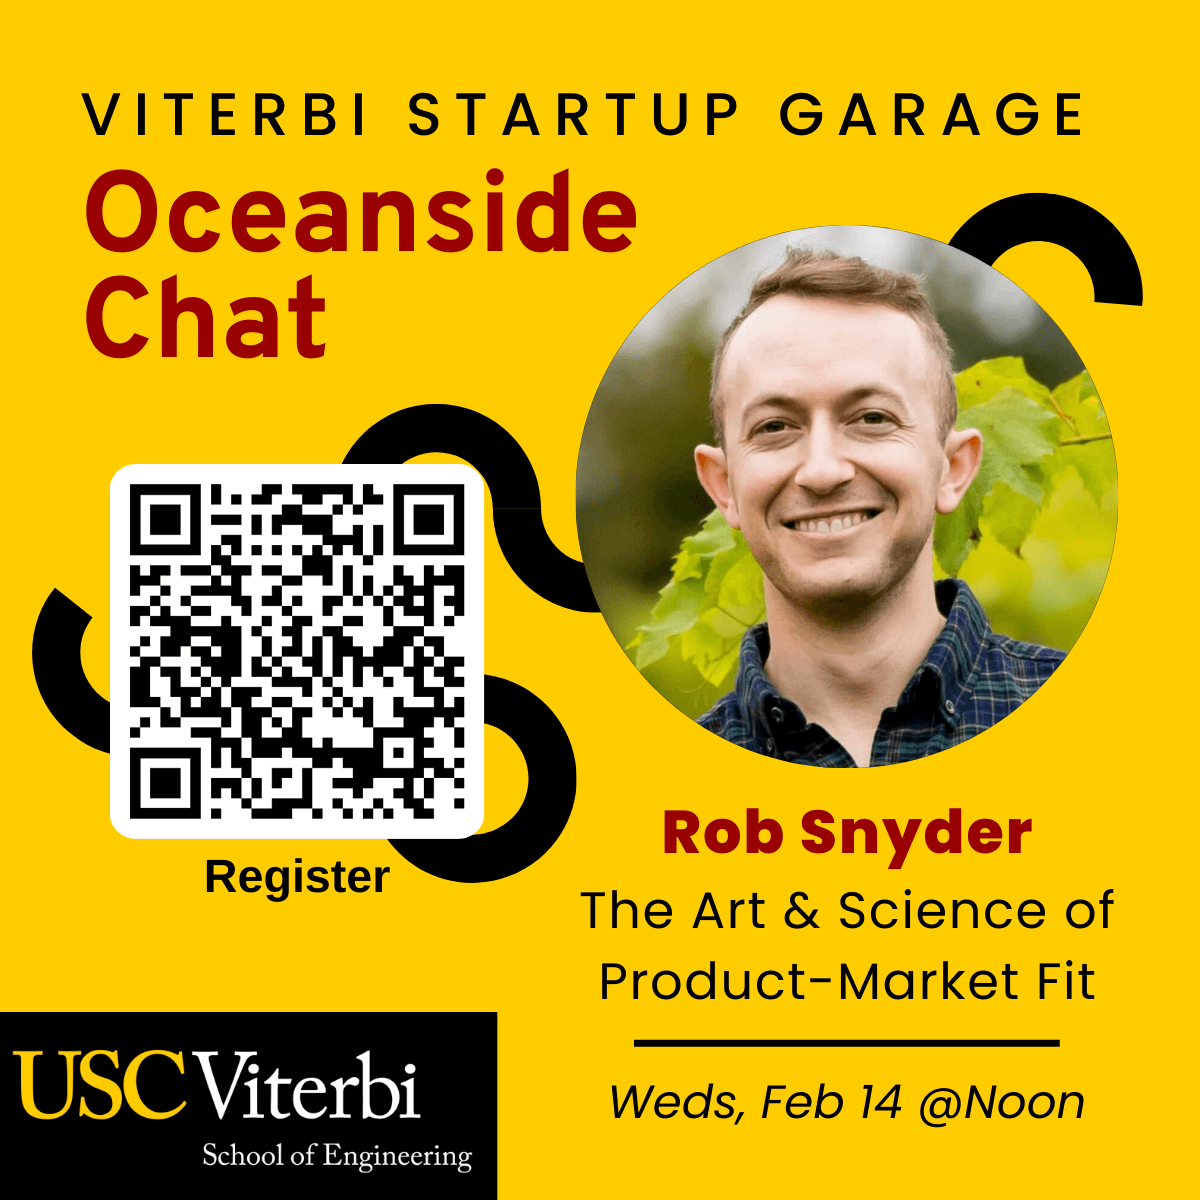 Featured image for “Viterbi Startup Garage Presents: The Art & Science of Product-Market Fit”